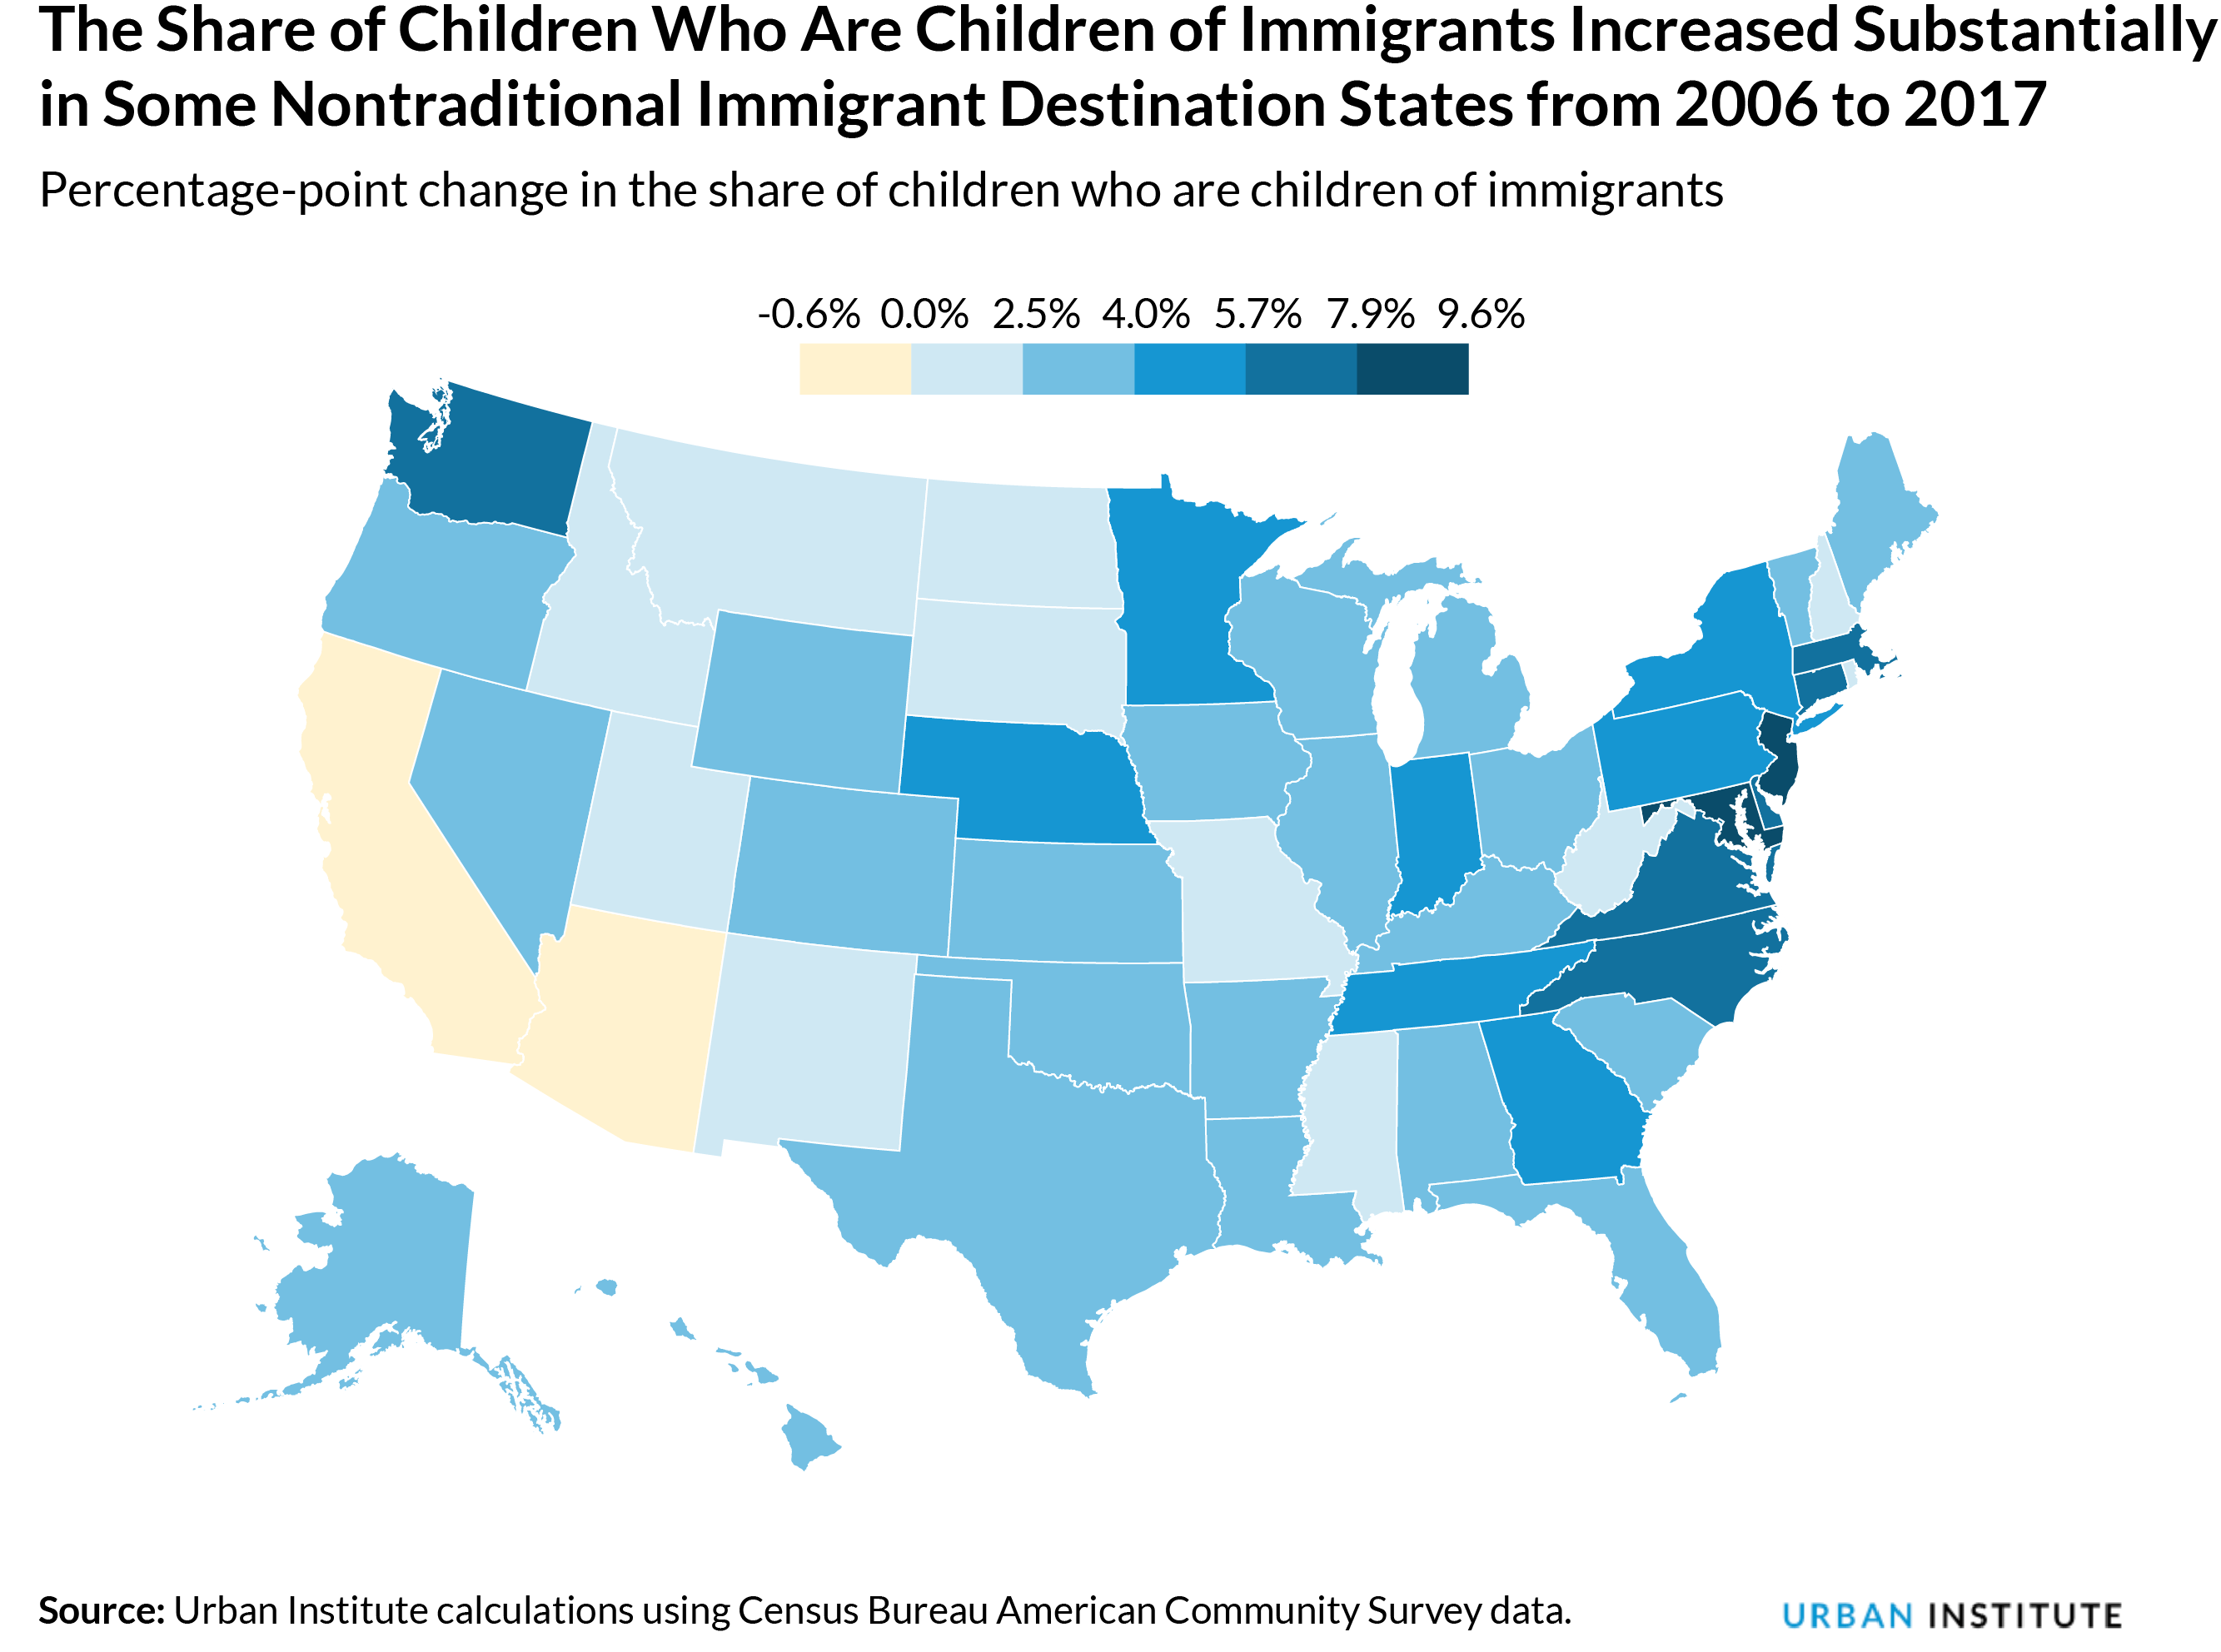 The Share of Children Who Are Children of Immigrants Increased Substantially in Some Nontraditional Immigrant Destination States from 2006 to 2017, Percentage-point change in the share of children who are children of immigrants